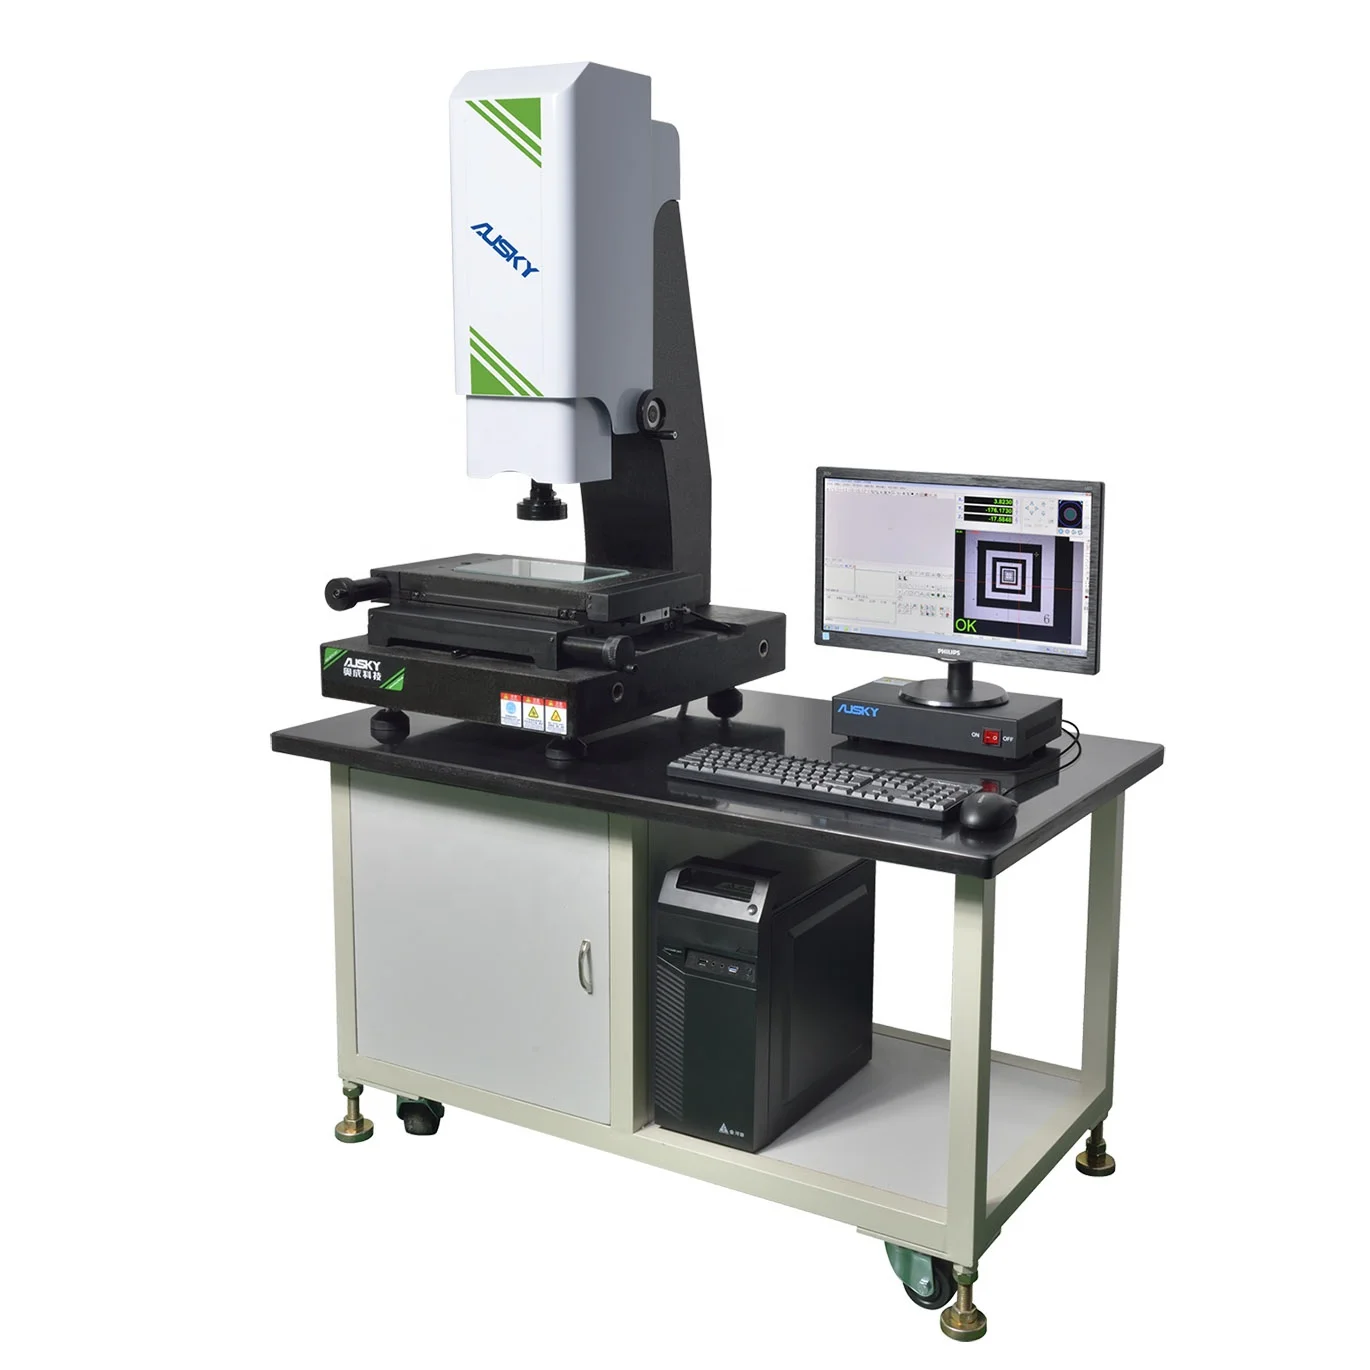 

High Precision Granite Structure High Stability Vision Inspection Machine 2D VMM Machine Video Measuring